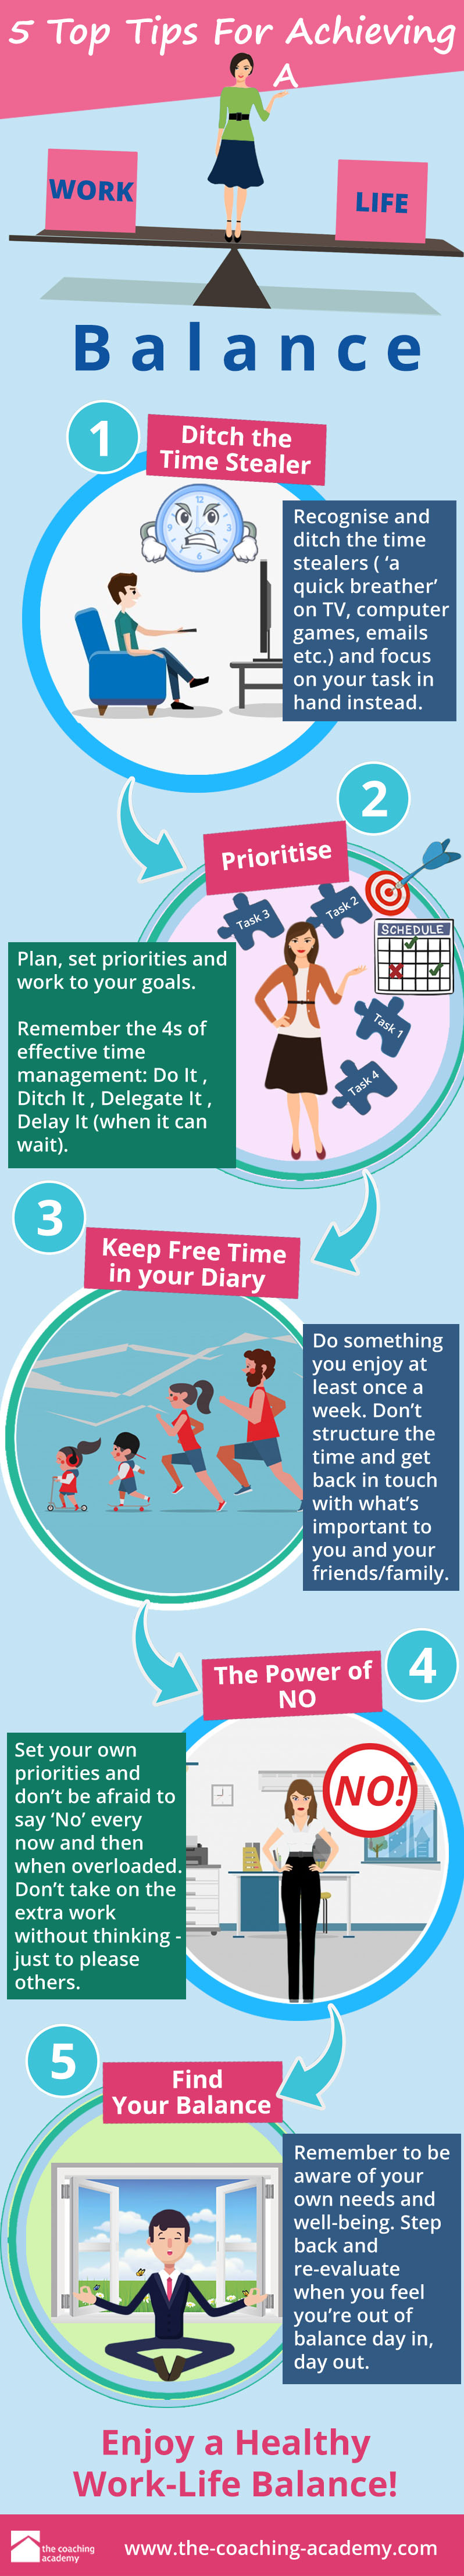 5 Top Tips for Achieving a Work-Life Balance